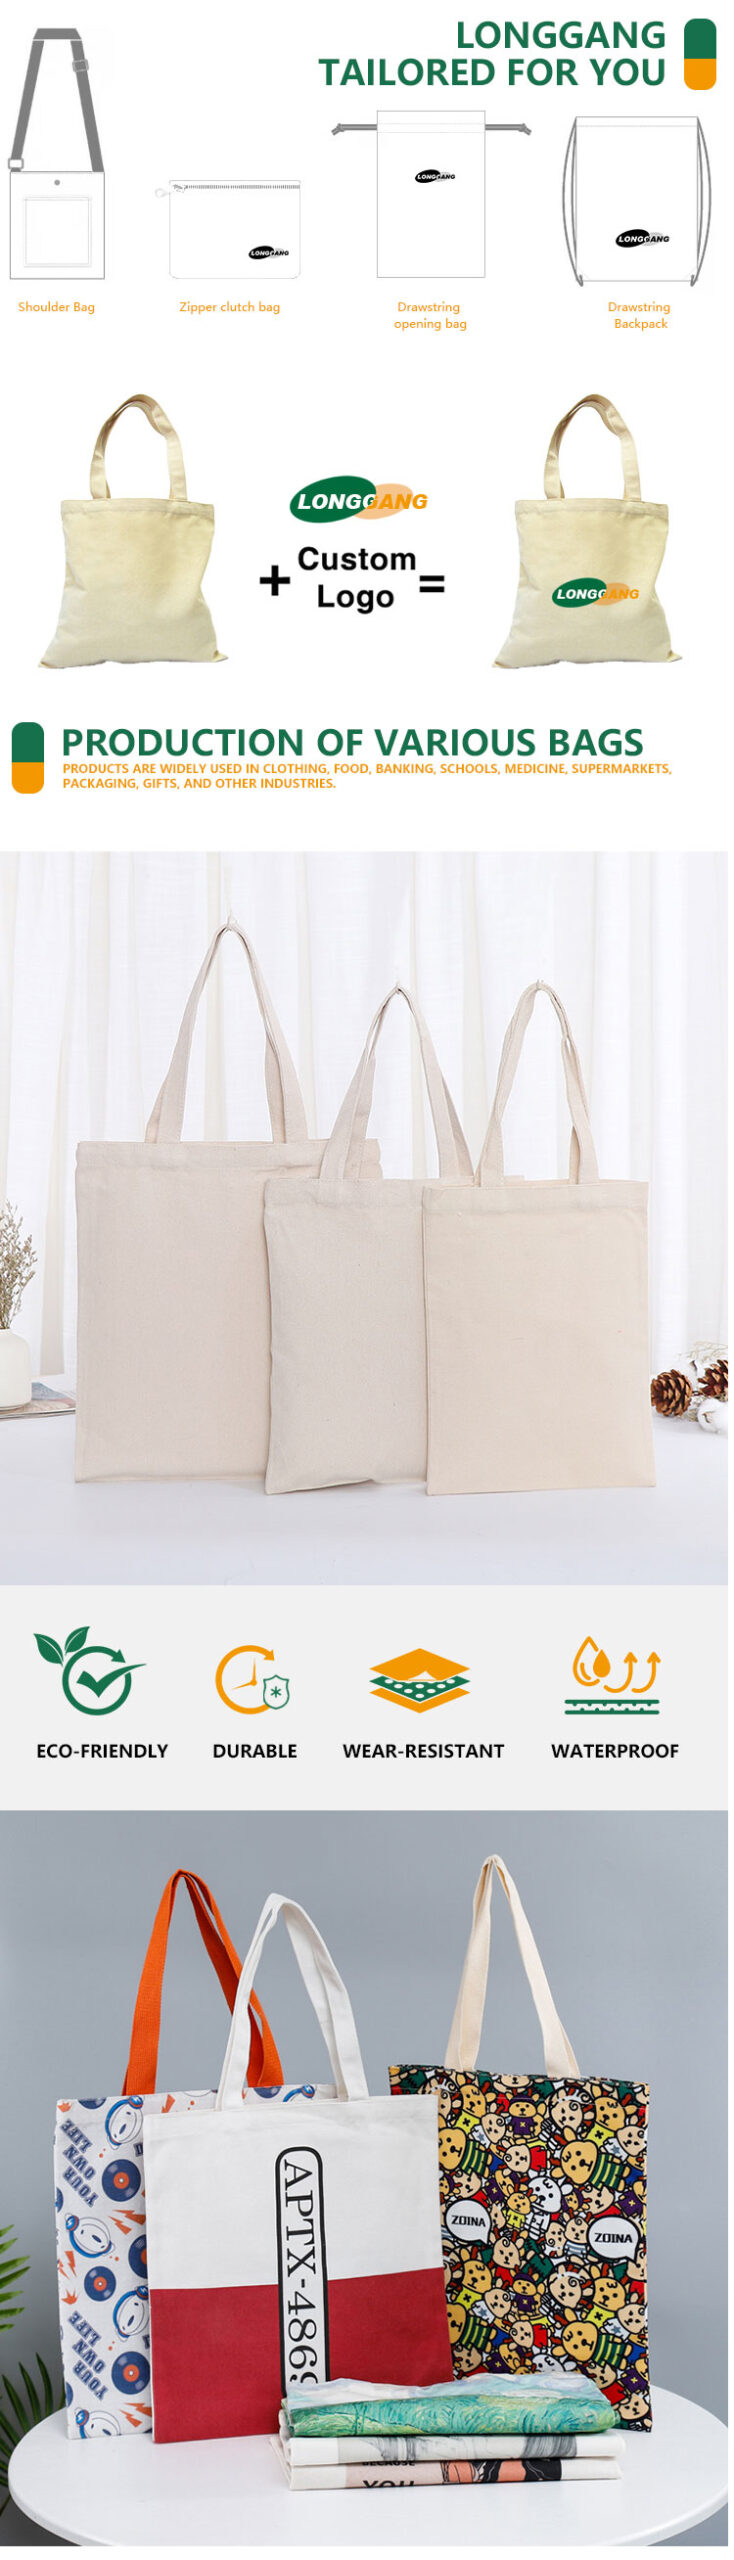 canvas luxury tote bags